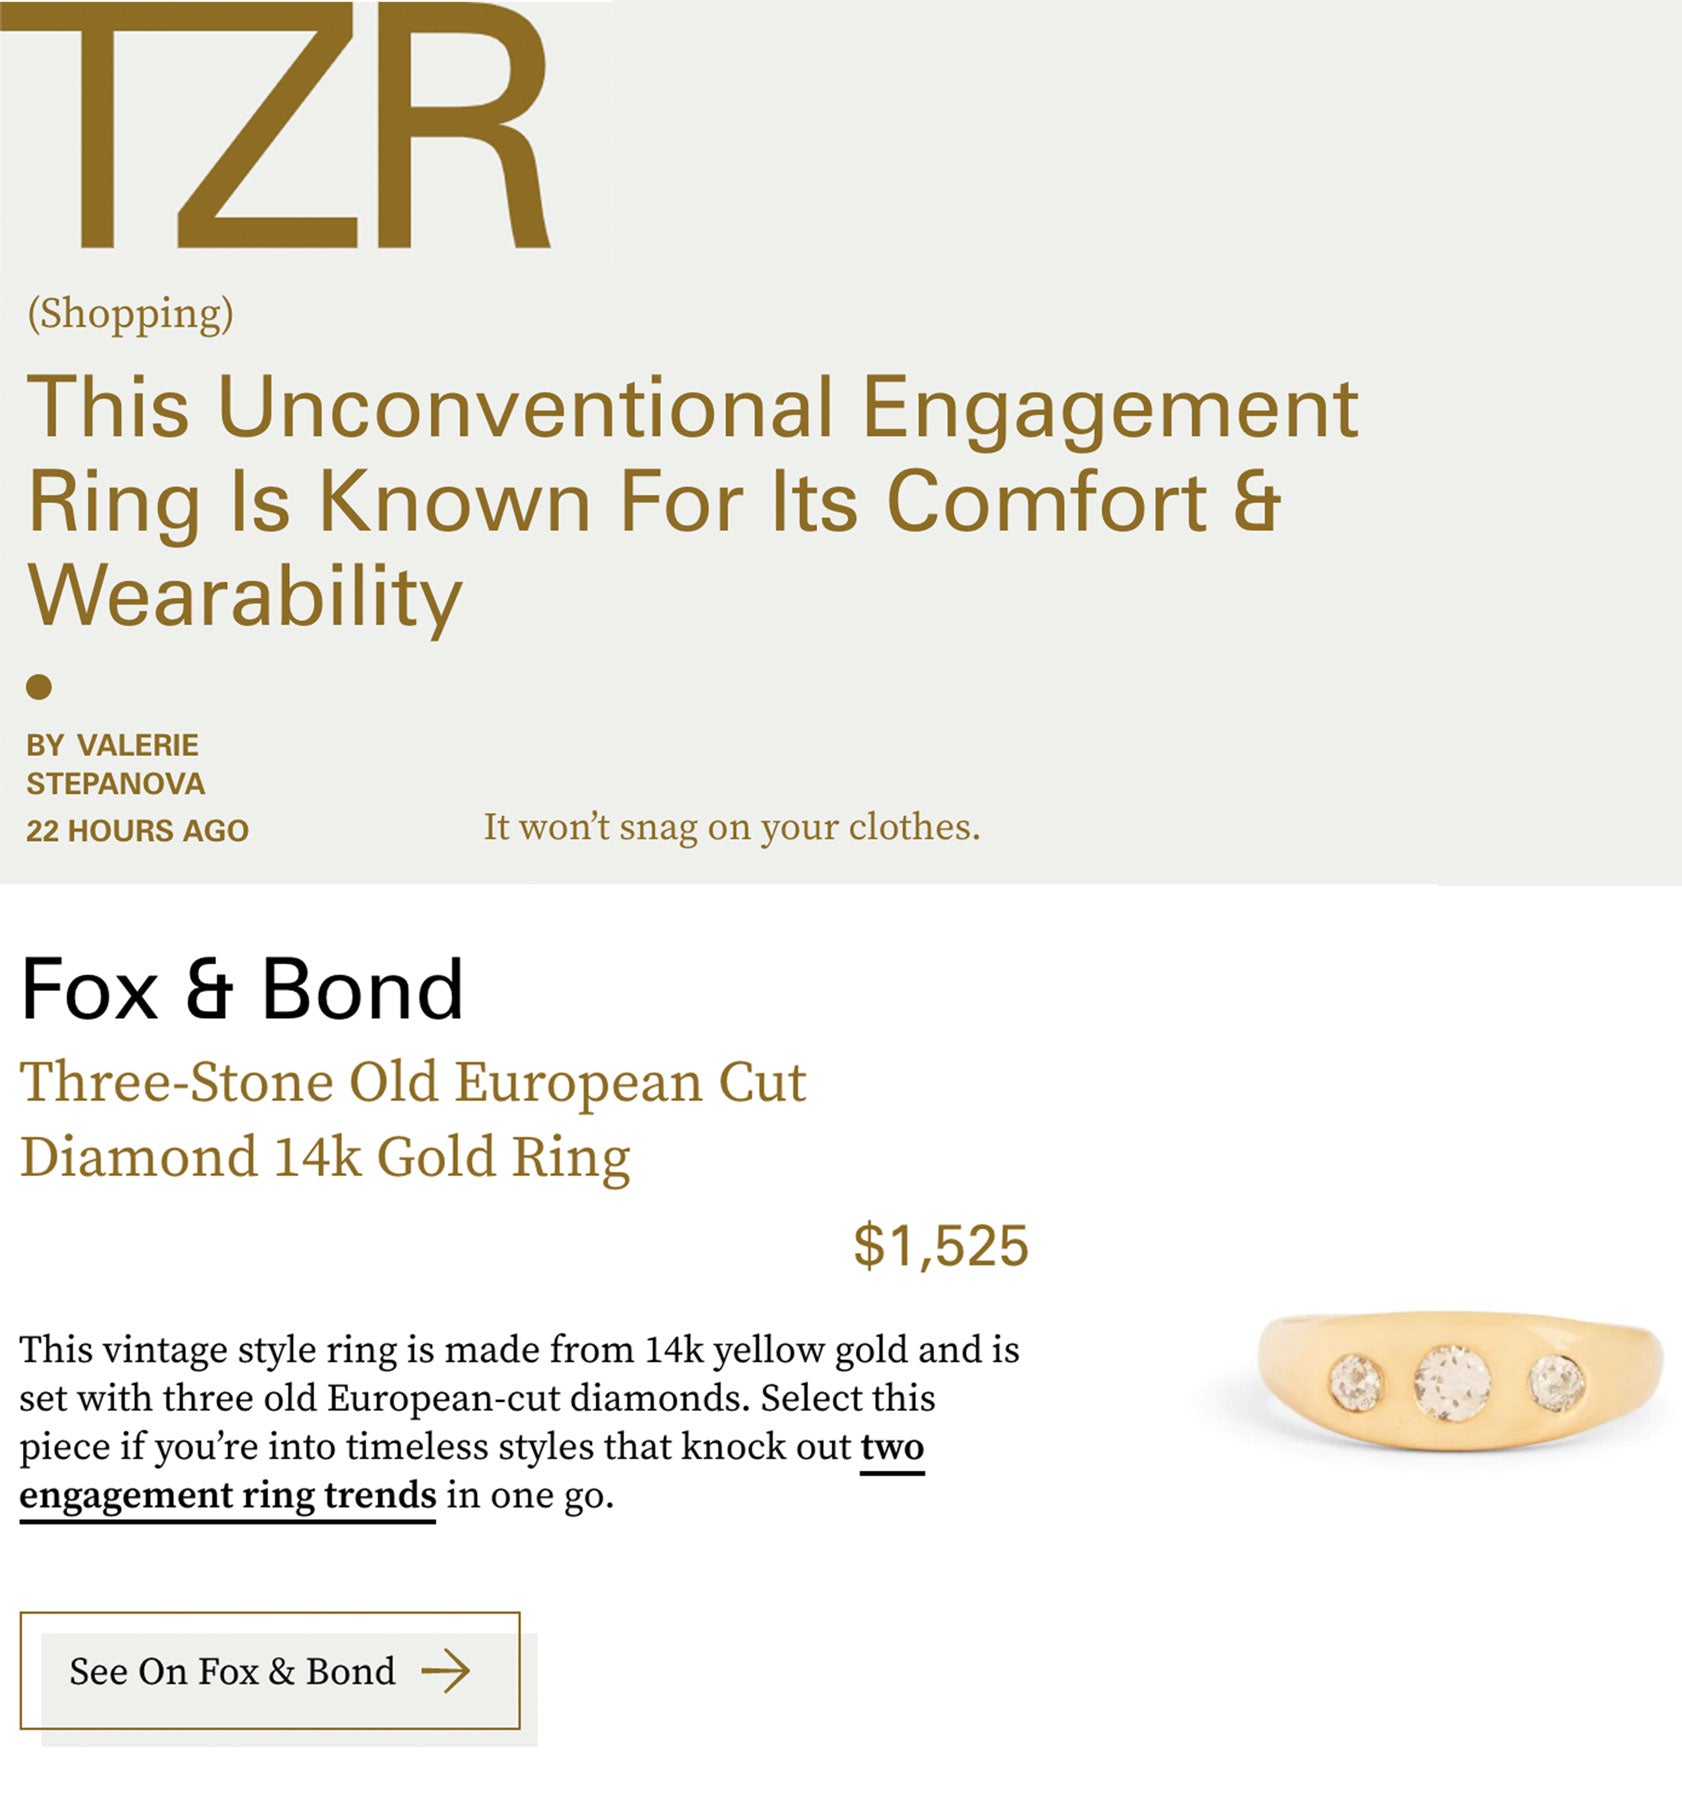 The Zoe Report: This Unconventional Engagement Ring Is Known For Its Comfort & Wearability